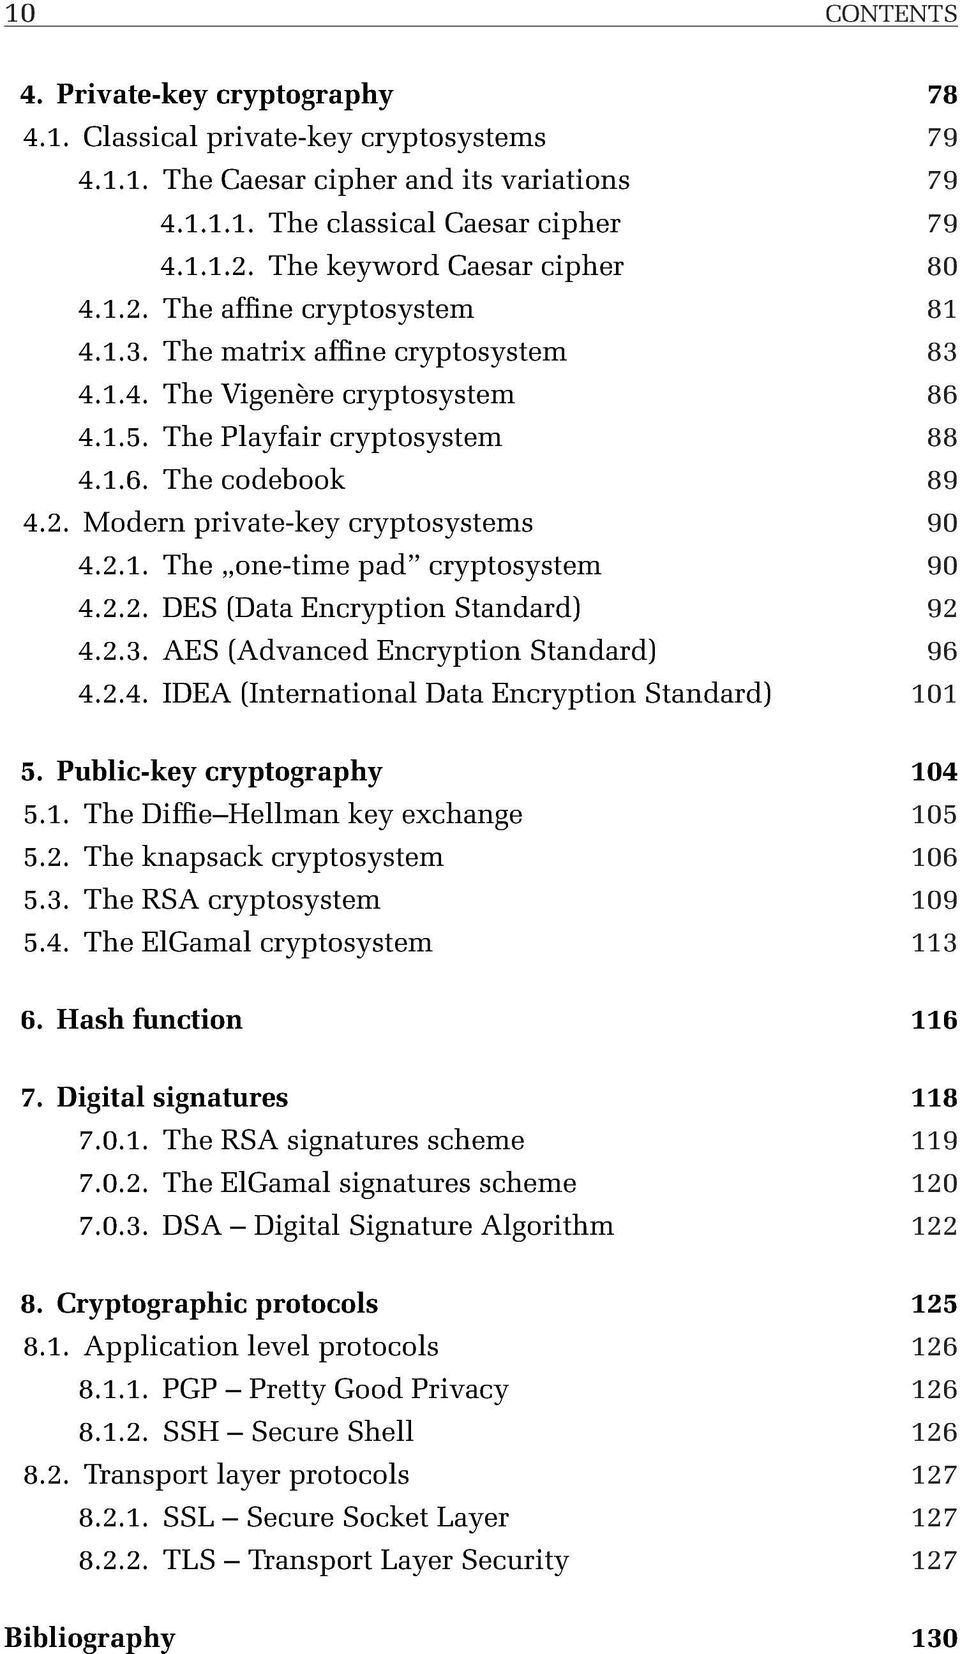 2.1. The one-time pad cryptosystem 90 4.2.2. DES (Data Encryption Standard) 92 4.2.3. AES (Advanced Encryption Standard) 96 4.2.4. IDEA (International Data Encryption Standard) 101 5.